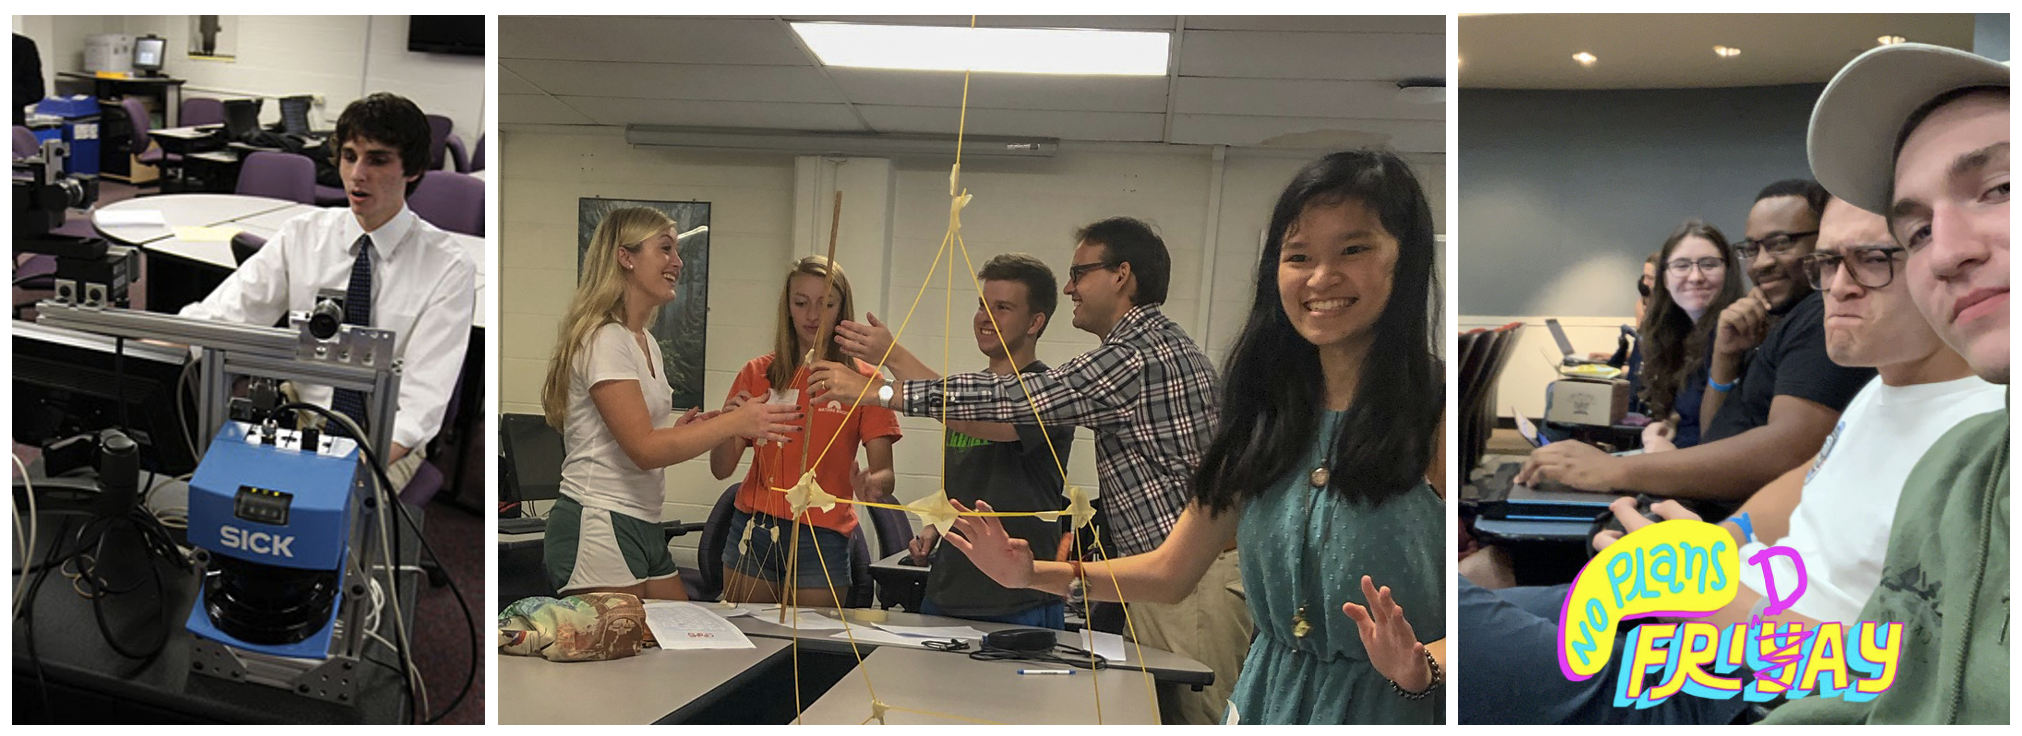 Three images side by side: a student with a robot, a group of students building a spaghetti tower, and four students at a hack-a-thon